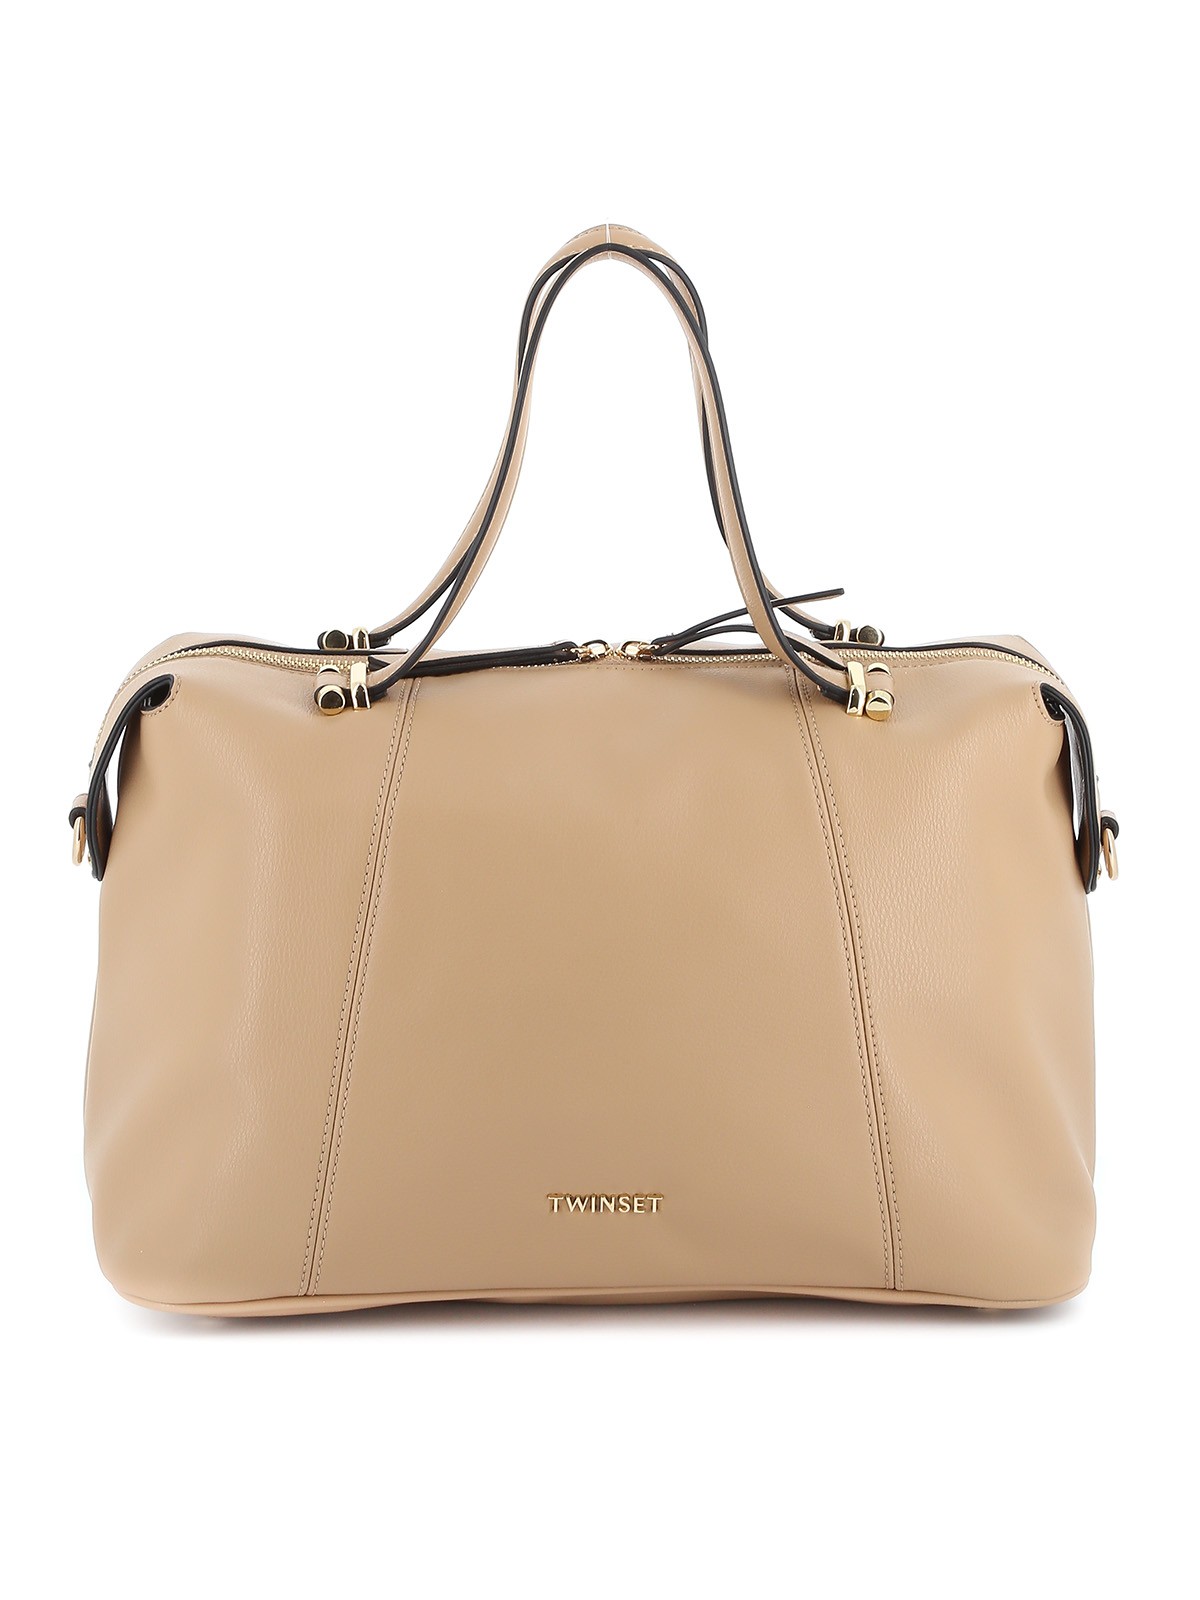 TWINSET FAUX LEATHER BEIGE BOWLING BAG